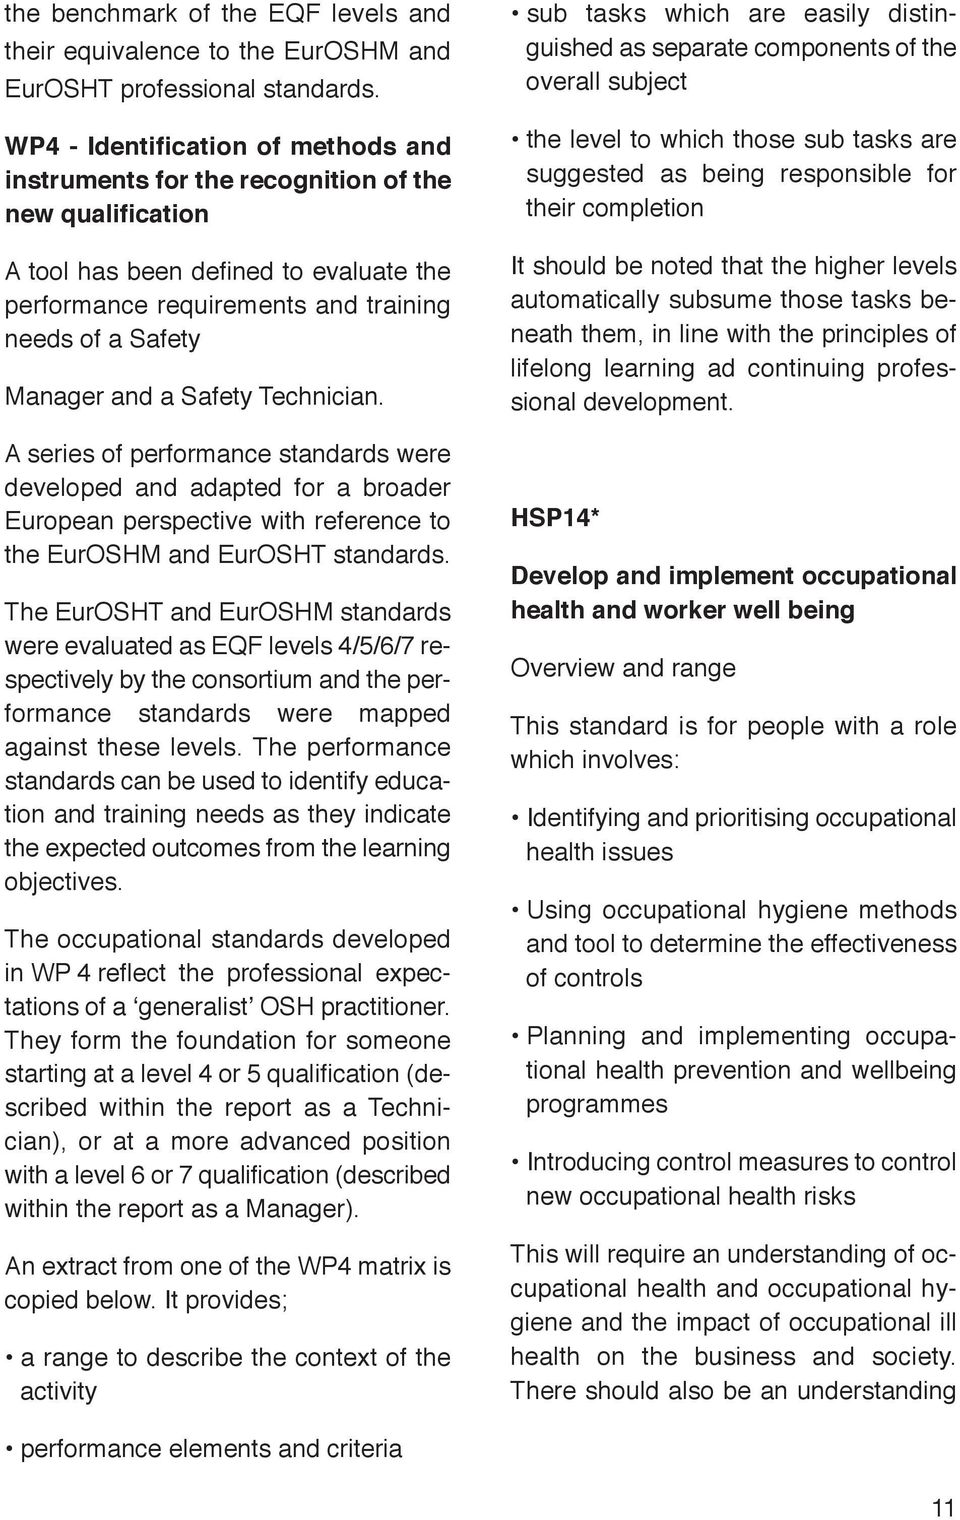 and a Safety Technician. A series of performance standards were developed and adapted for a broader European perspective with reference to the EurOSHM and EurOSHT standards.